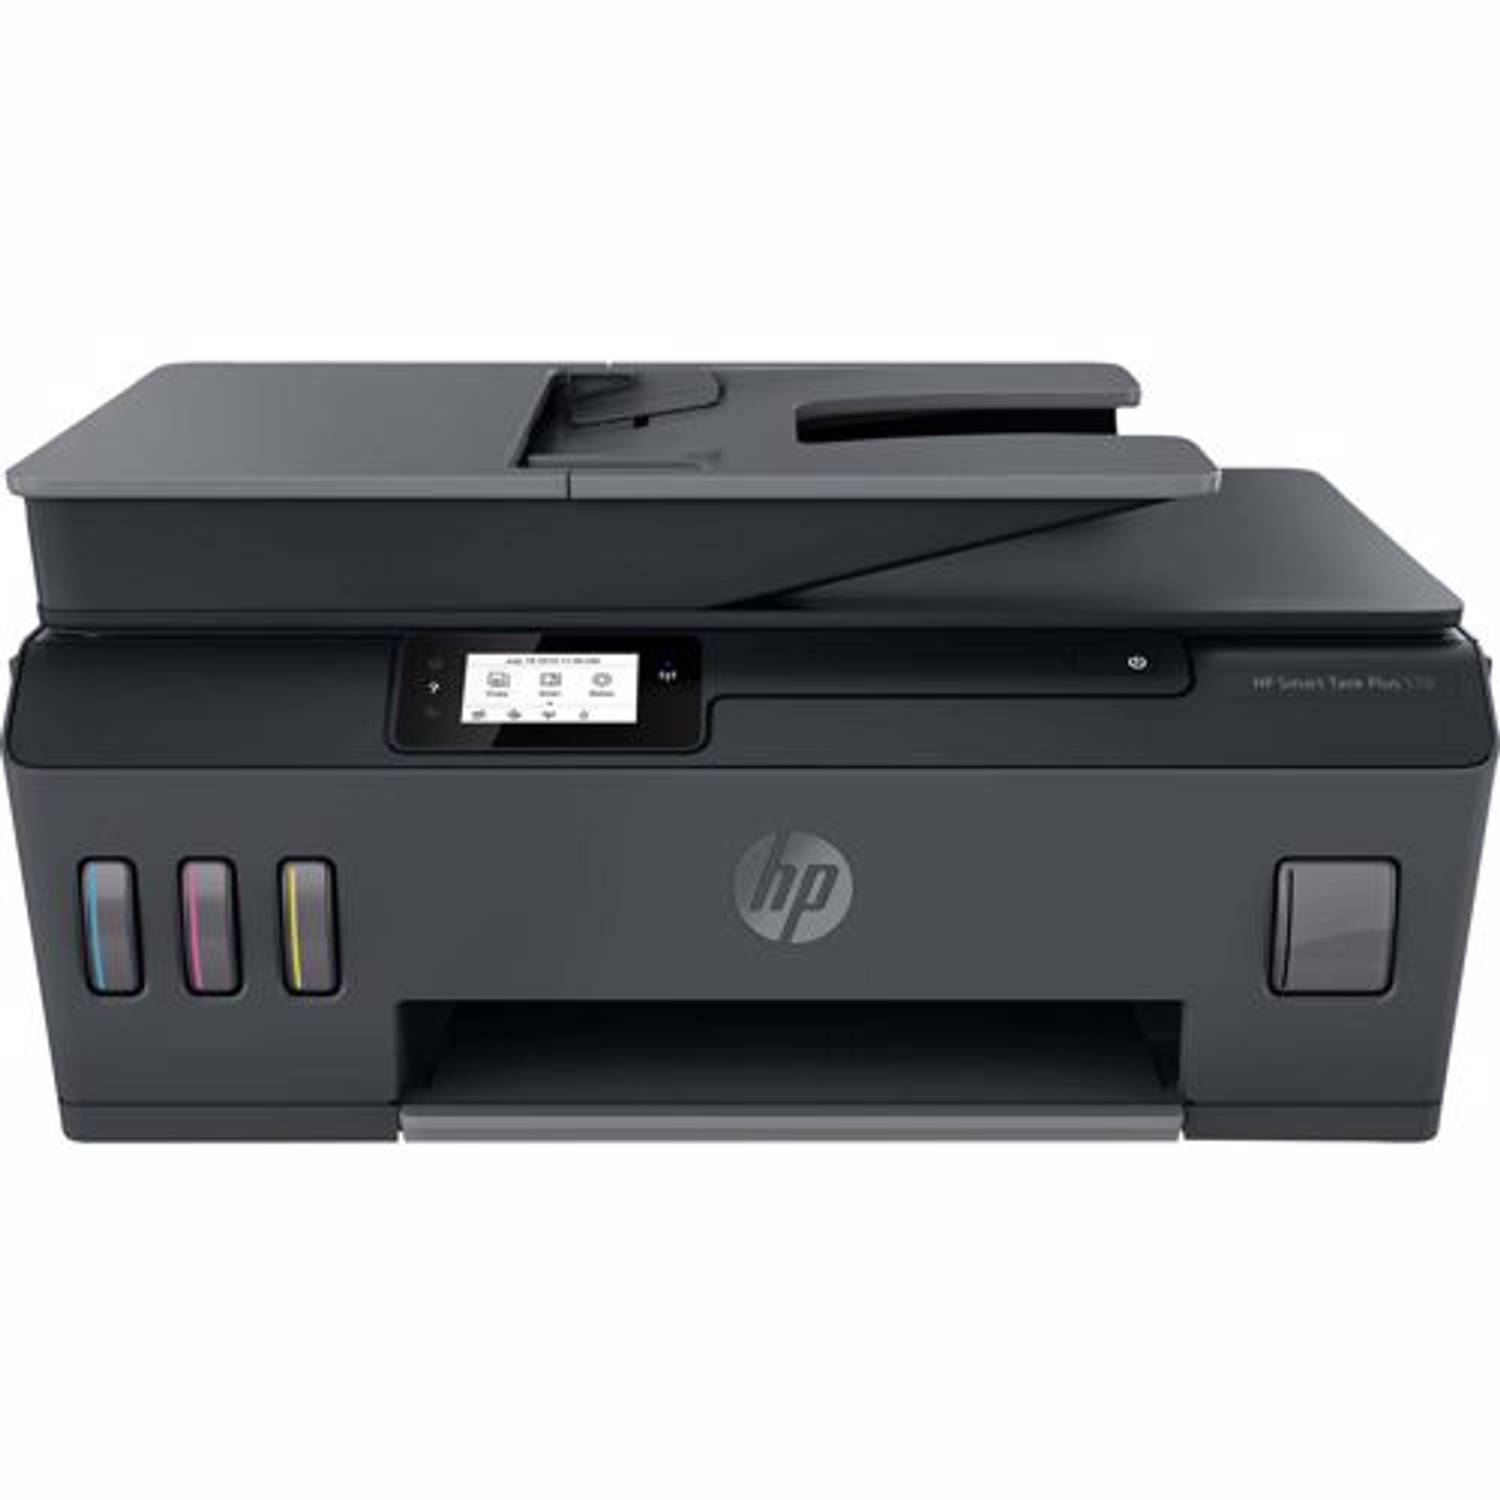 HP all-in-one printer SMART TANK 570